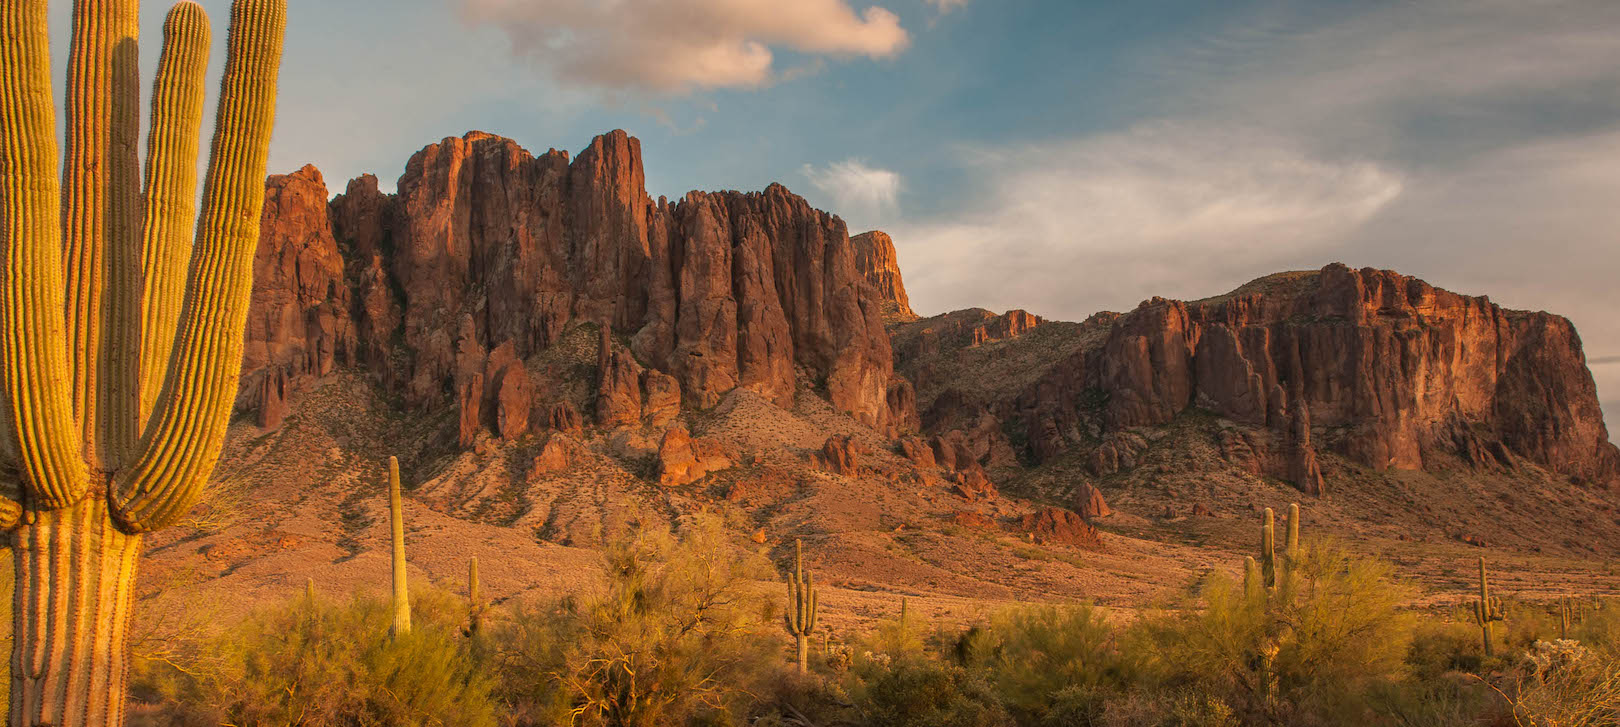 A view of the Superstition Mountains with a saguaro in the foreground